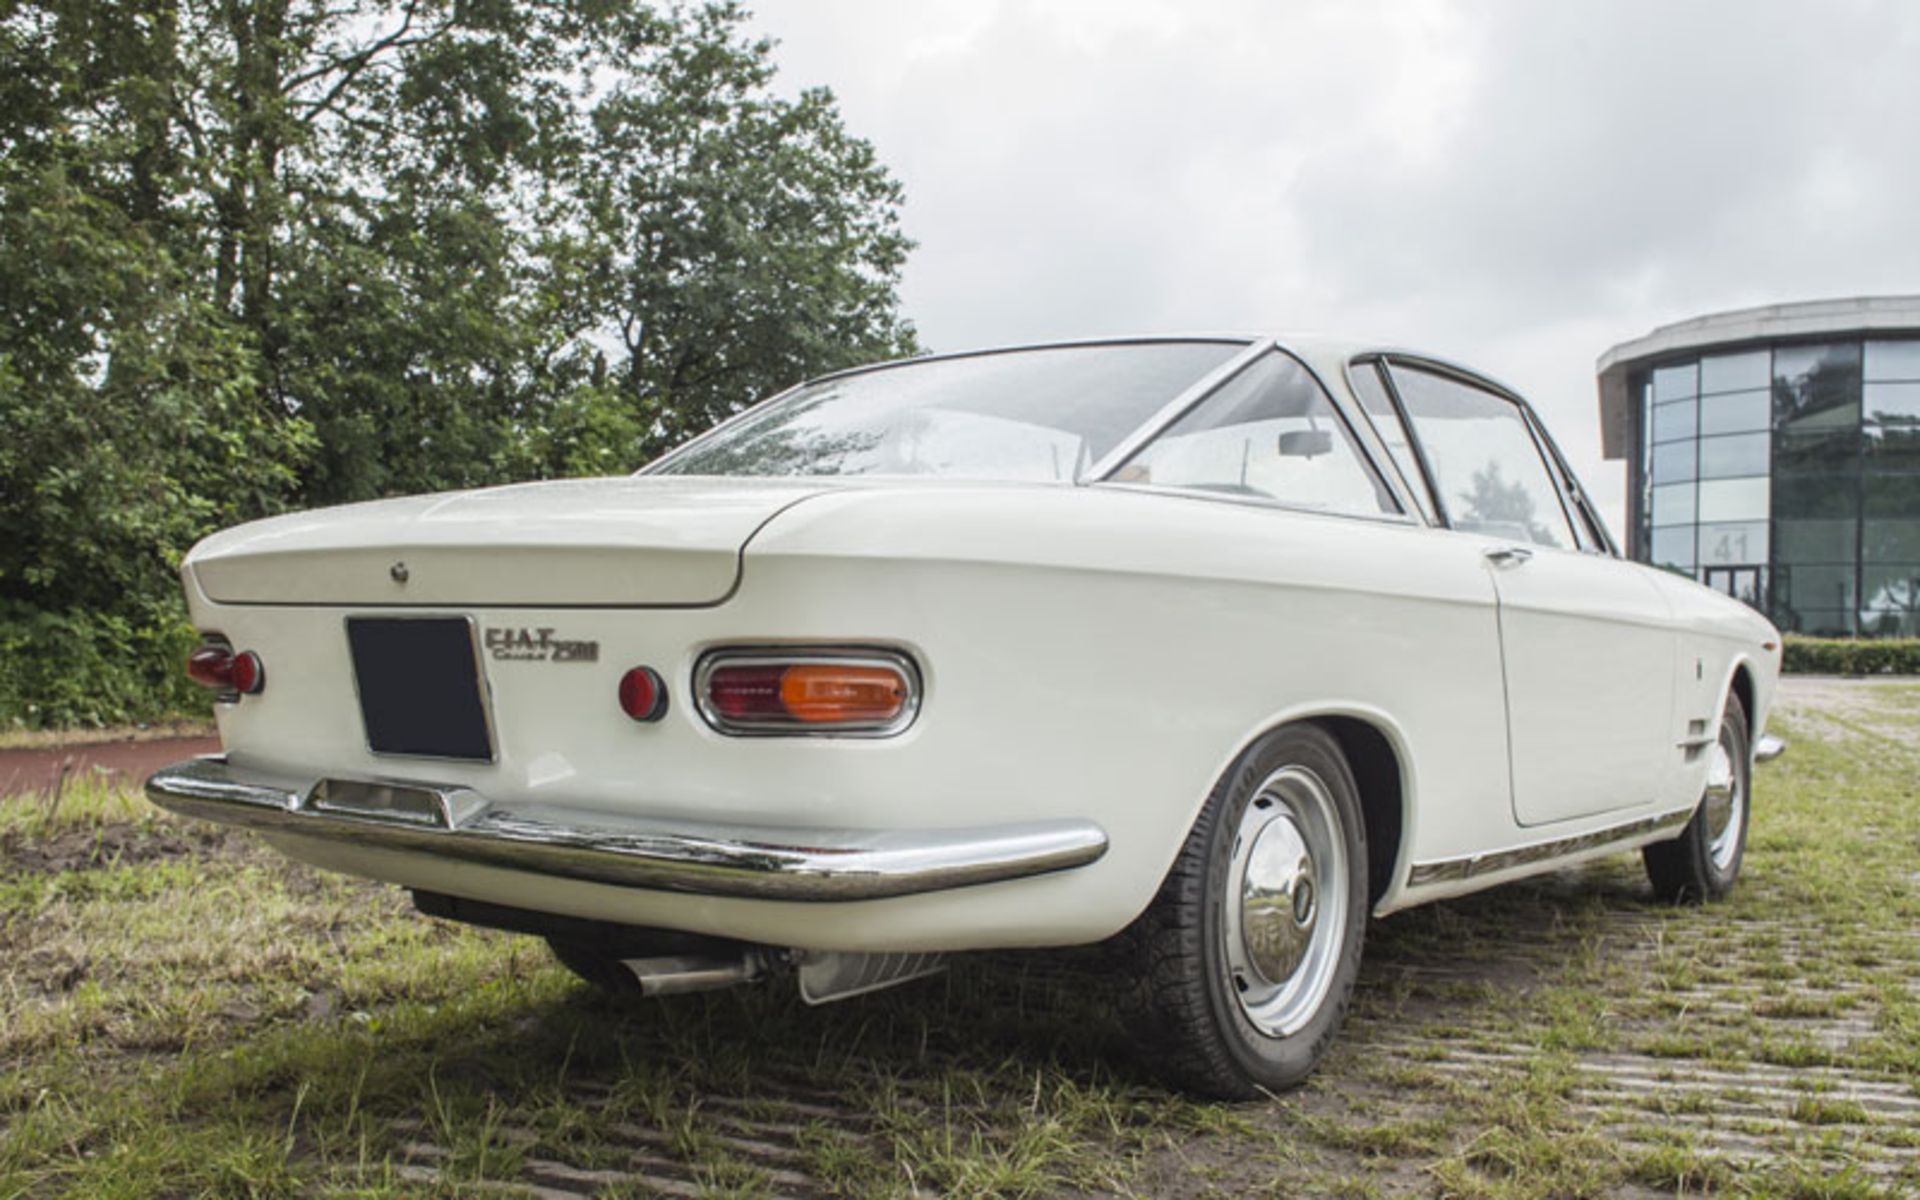 1962 Fiat 2300 Coupe - Image 3 of 6